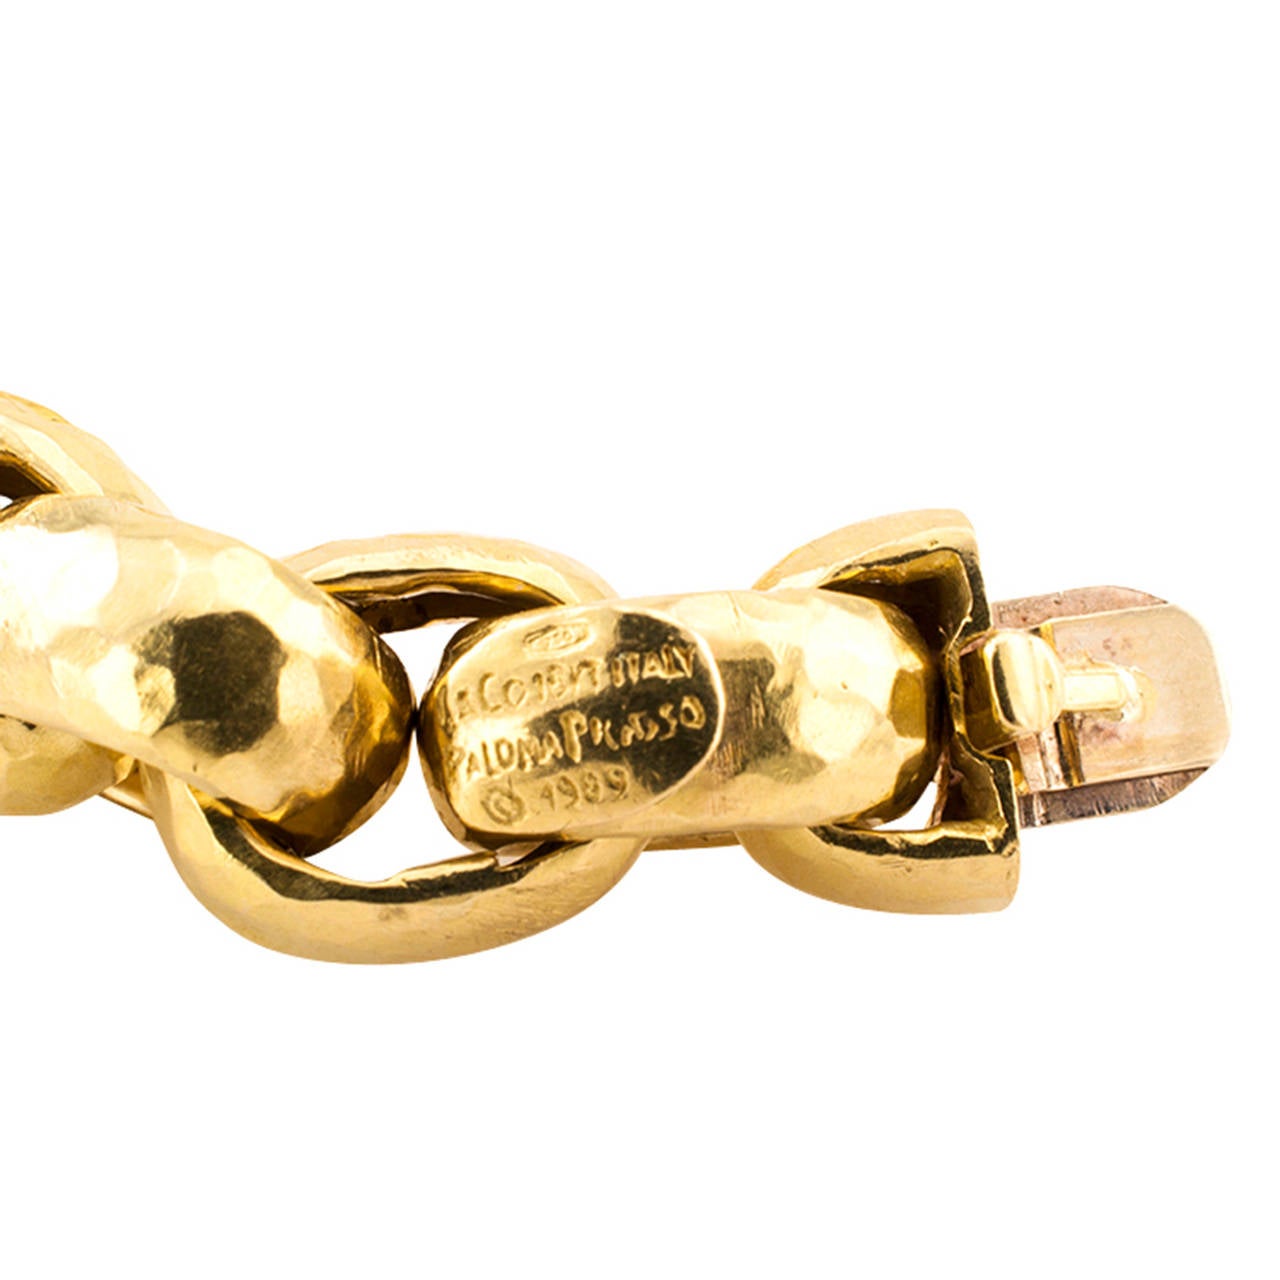 Tiffany & Co. Paloma Picasso Gold Link Bracelet

It is very easy to fall in love with the chunkiness of this bracelet, the genuine beauty and simplicity of Paloma Picasso's design.  The soft color of the gold and the hammer strike pattern that